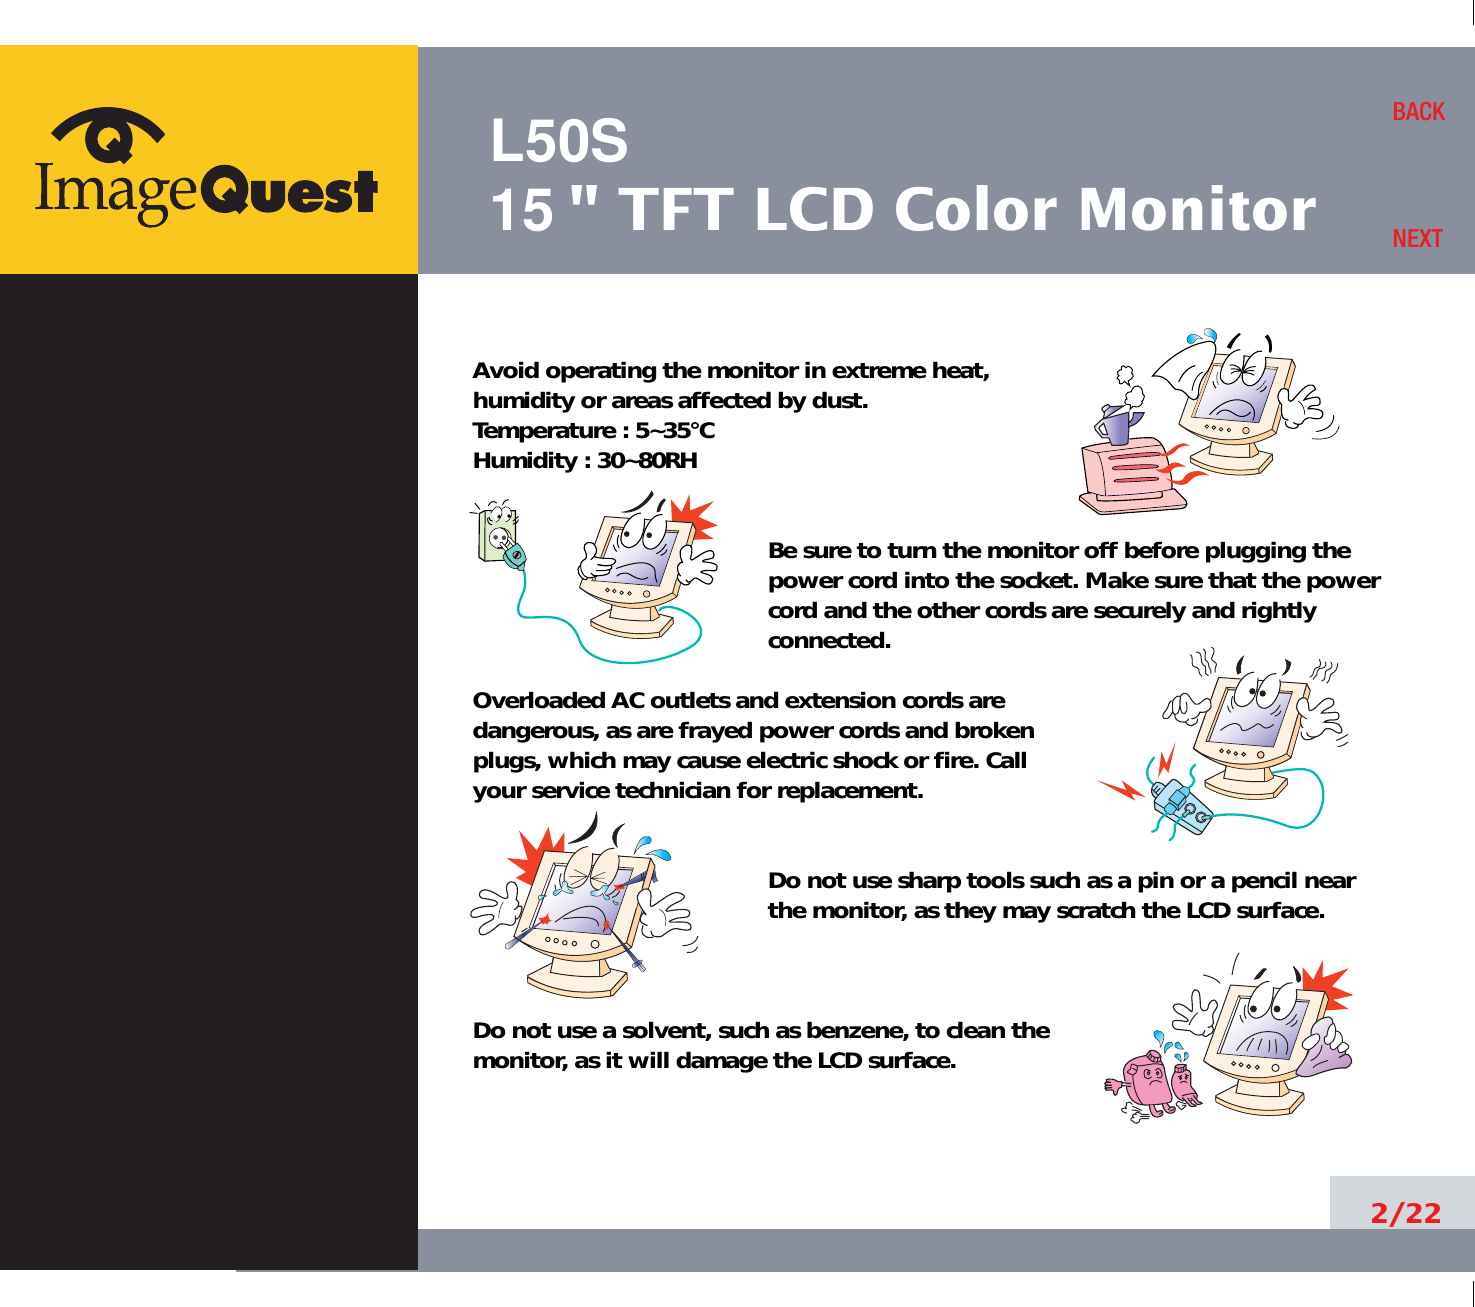 L50S15&quot; TFT LCD Color Monitor2/22BACKNEXTAvoid operating the monitor in extreme heat, humidity or areas affected by dust. Temperature : 5~35°CHumidity : 30~80RH Be sure to turn the monitor off before plugging thepower cord into the socket. Make sure that the powercord and the other cords are securely and rightlyconnected.Overloaded AC outlets and extension cords are dangerous, as are frayed power cords and broken plugs, which may cause electric shock or fire. Call your service technician for replacement.Do not use sharp tools such as a pin or a pencil near the monitor, as they may scratch the LCD surface.Do not use a solvent, such as benzene, to clean the monitor, as it will damage the LCD surface.